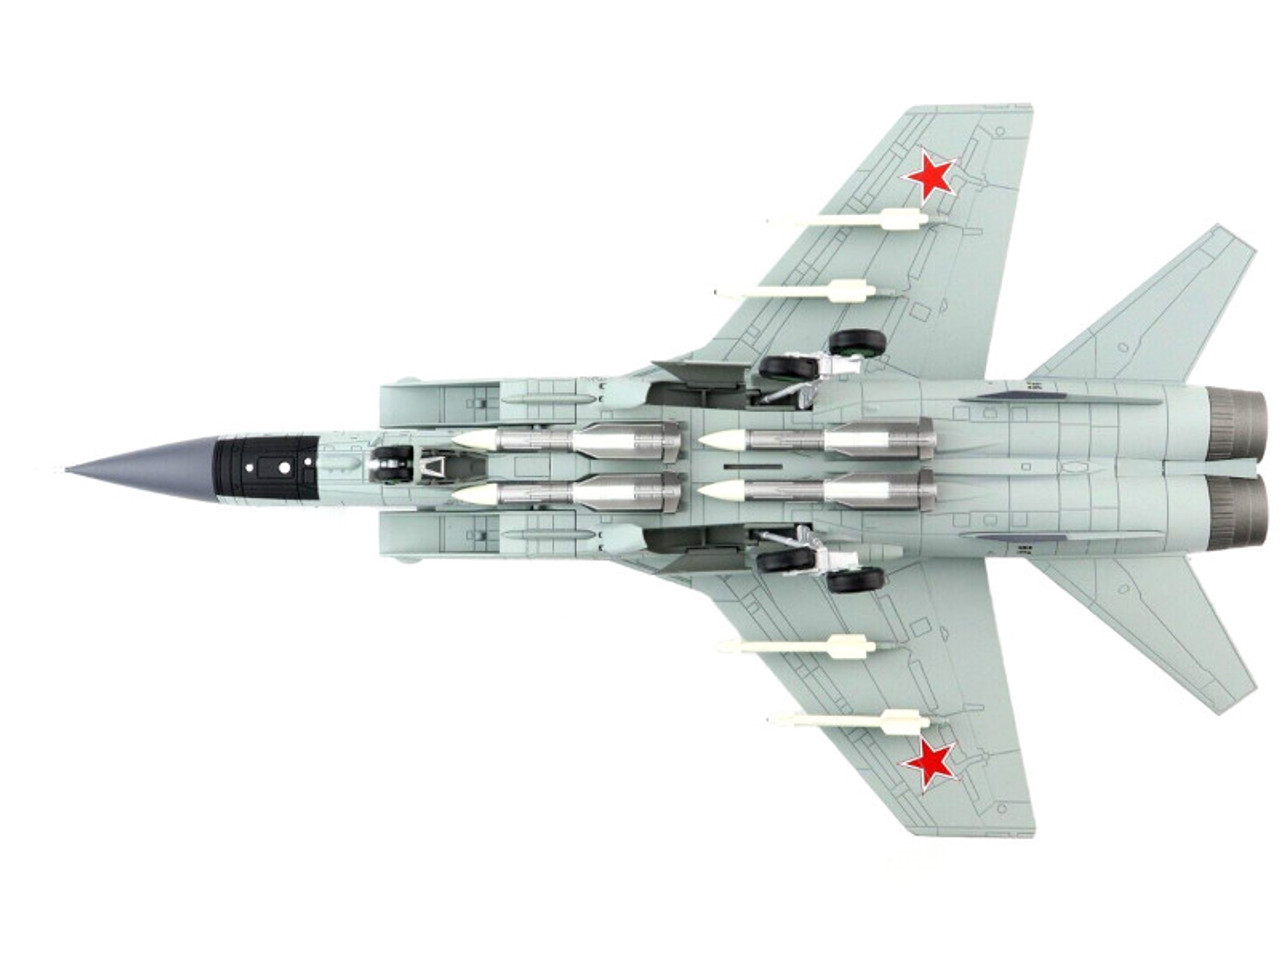 Mikoyan MiG-31B Foxhound Aircraft "Blue 08 Russian Air Force" "Air Power Series" 1/72 Diecast Model by Hobby Master